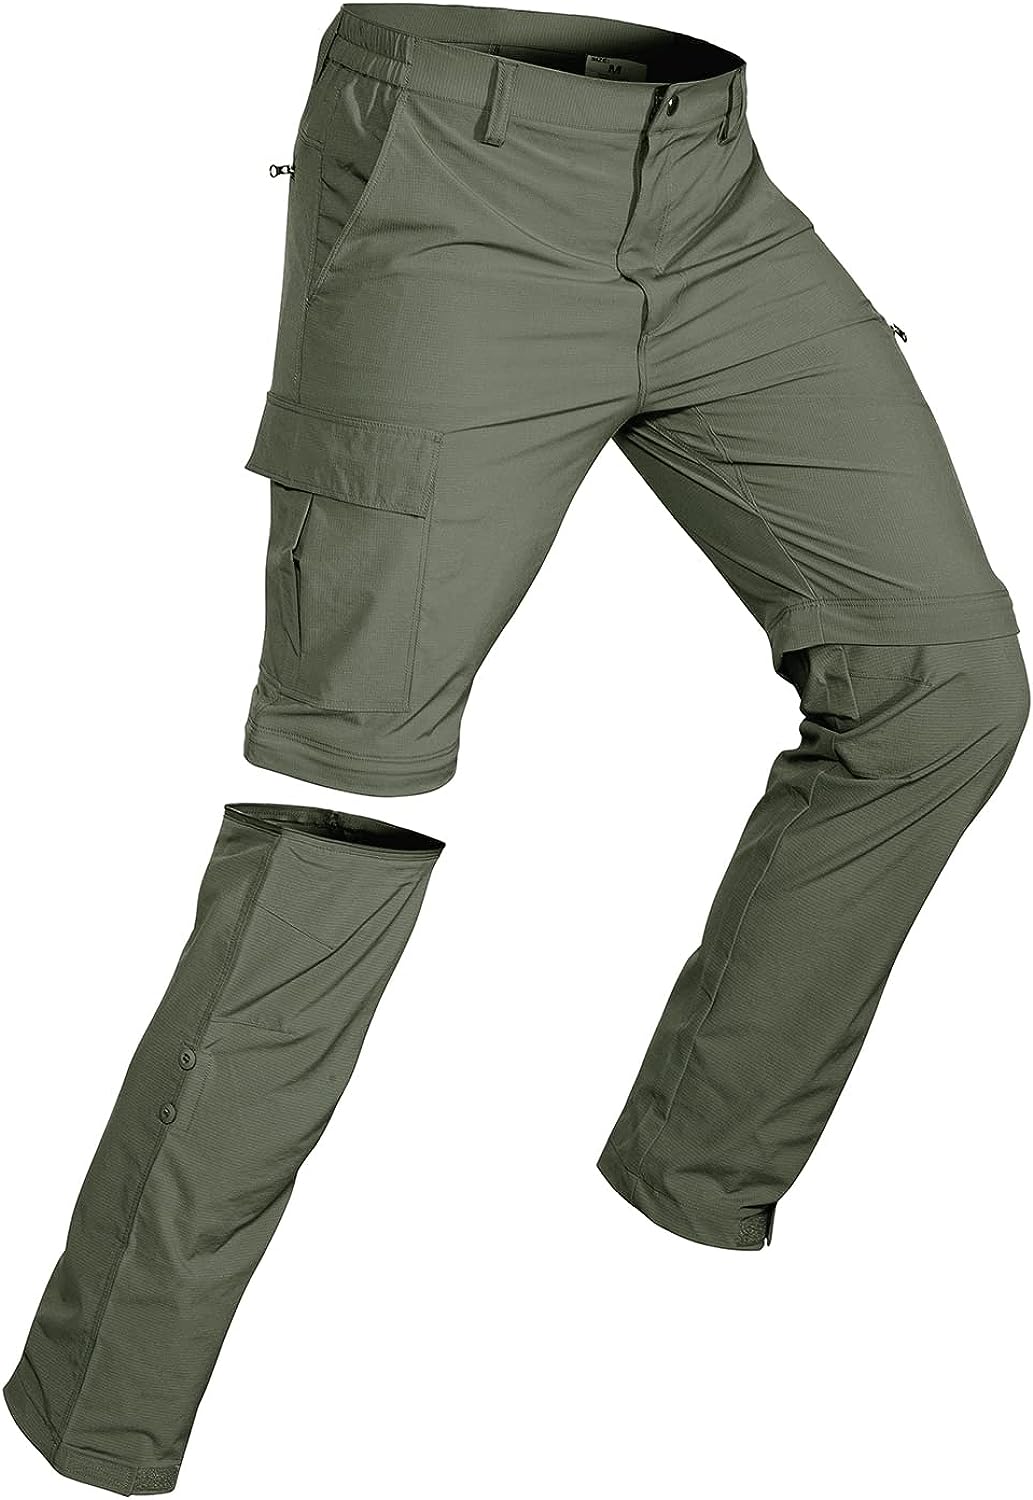 Women's Hiking Pants - Convertible, Quick Dry, Multi-Function for